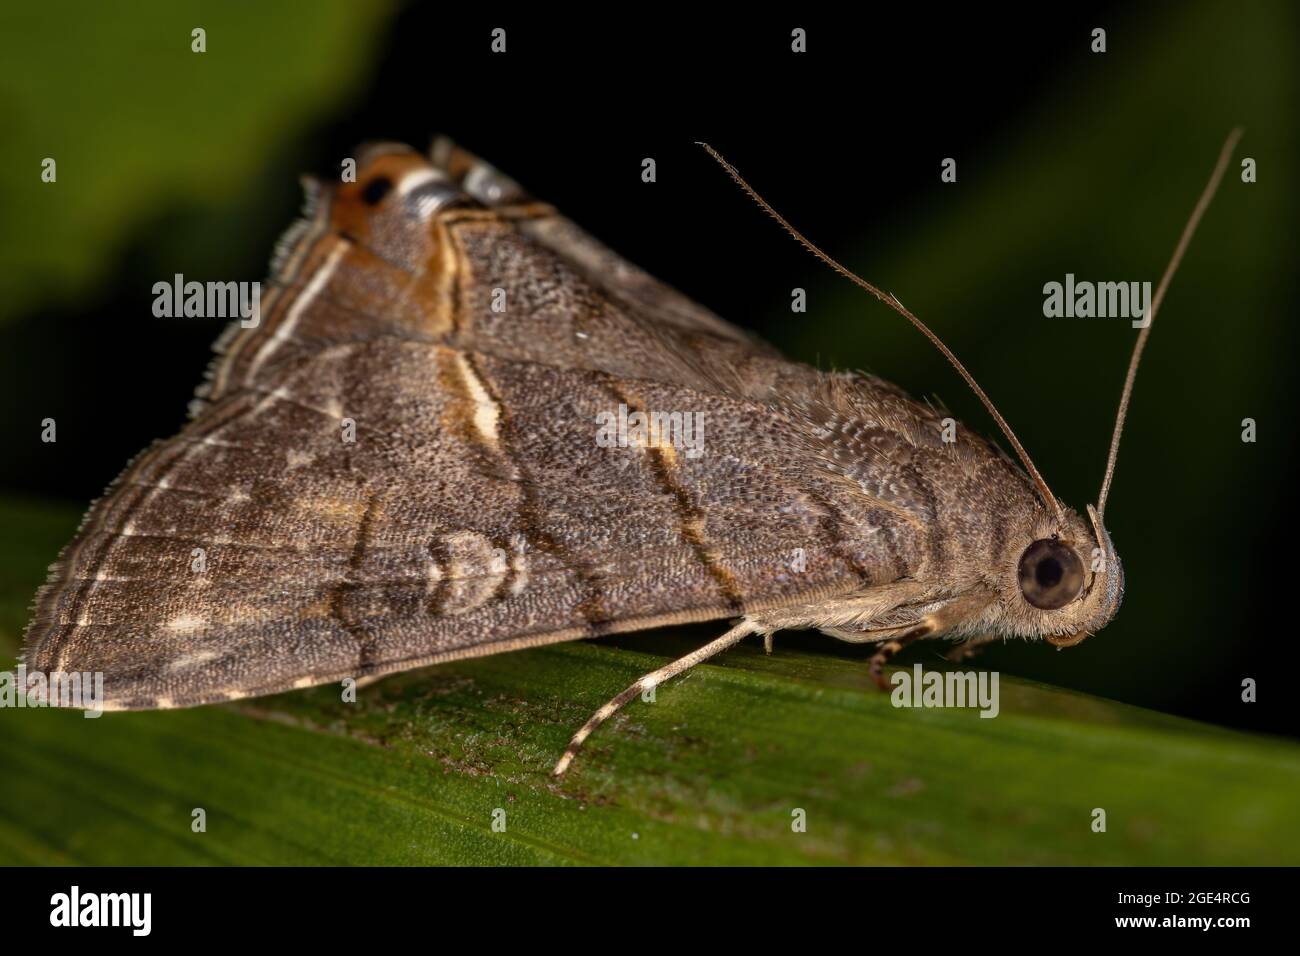 Adult Underwing Moth of the Tribe Eulepidotini Stock Photo